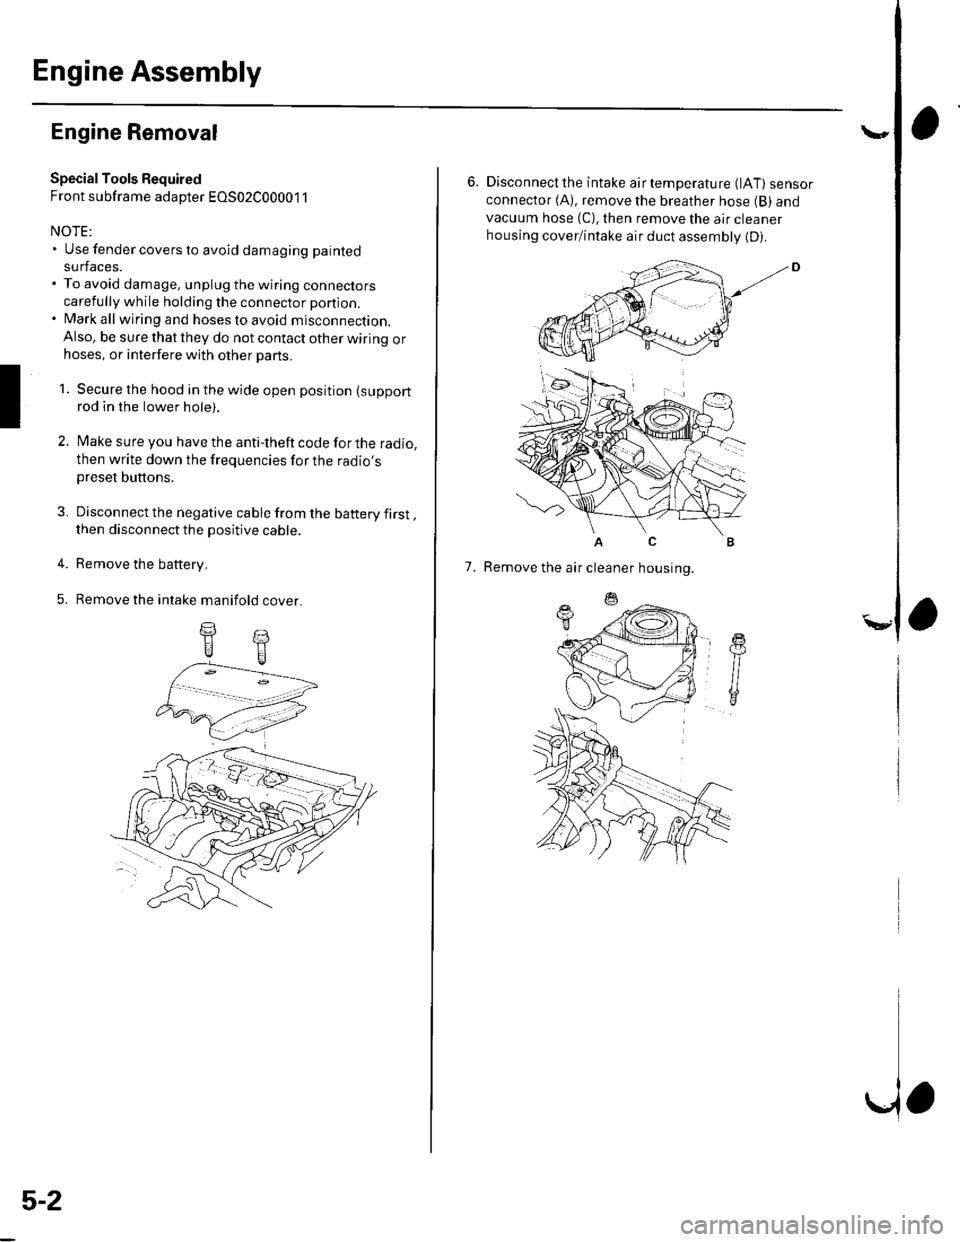 HONDA CIVIC 2003 7.G User Guide Engine Assembly
I
Engine Removal
Special Tools Required
Front subframe adapter EOS02C00001 1
NOTE:. Use fender covers to avoid damaging painted
surfaces.. To avoid damage, unplug the wiring connectors